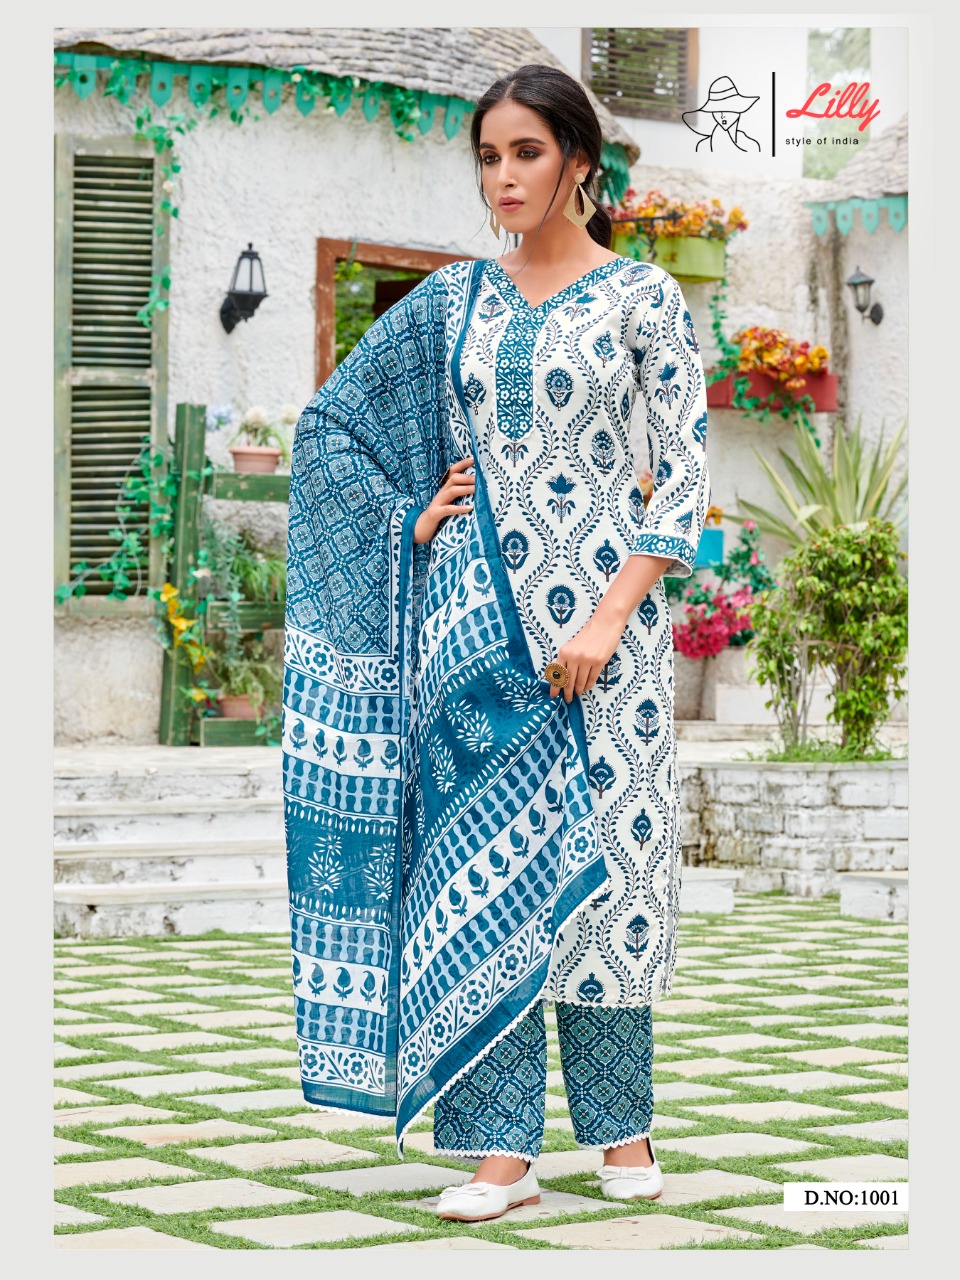 lilly style of india pushpa linen cotton new and modern style top pent with dupatta catalog